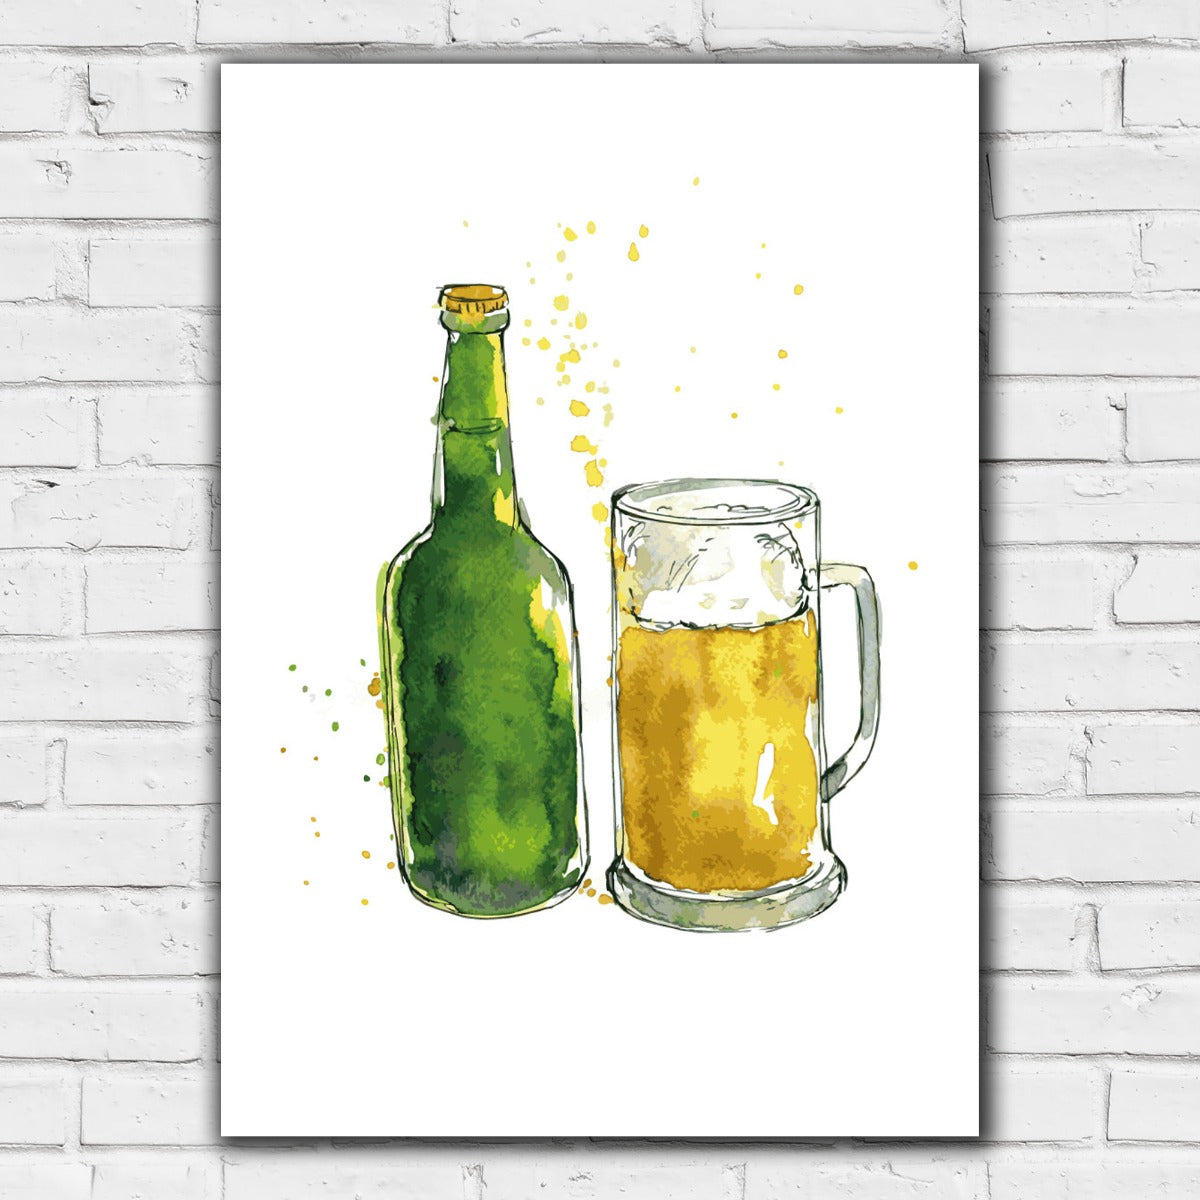 Alcohol Print - Beer Bottle and Pint Glass